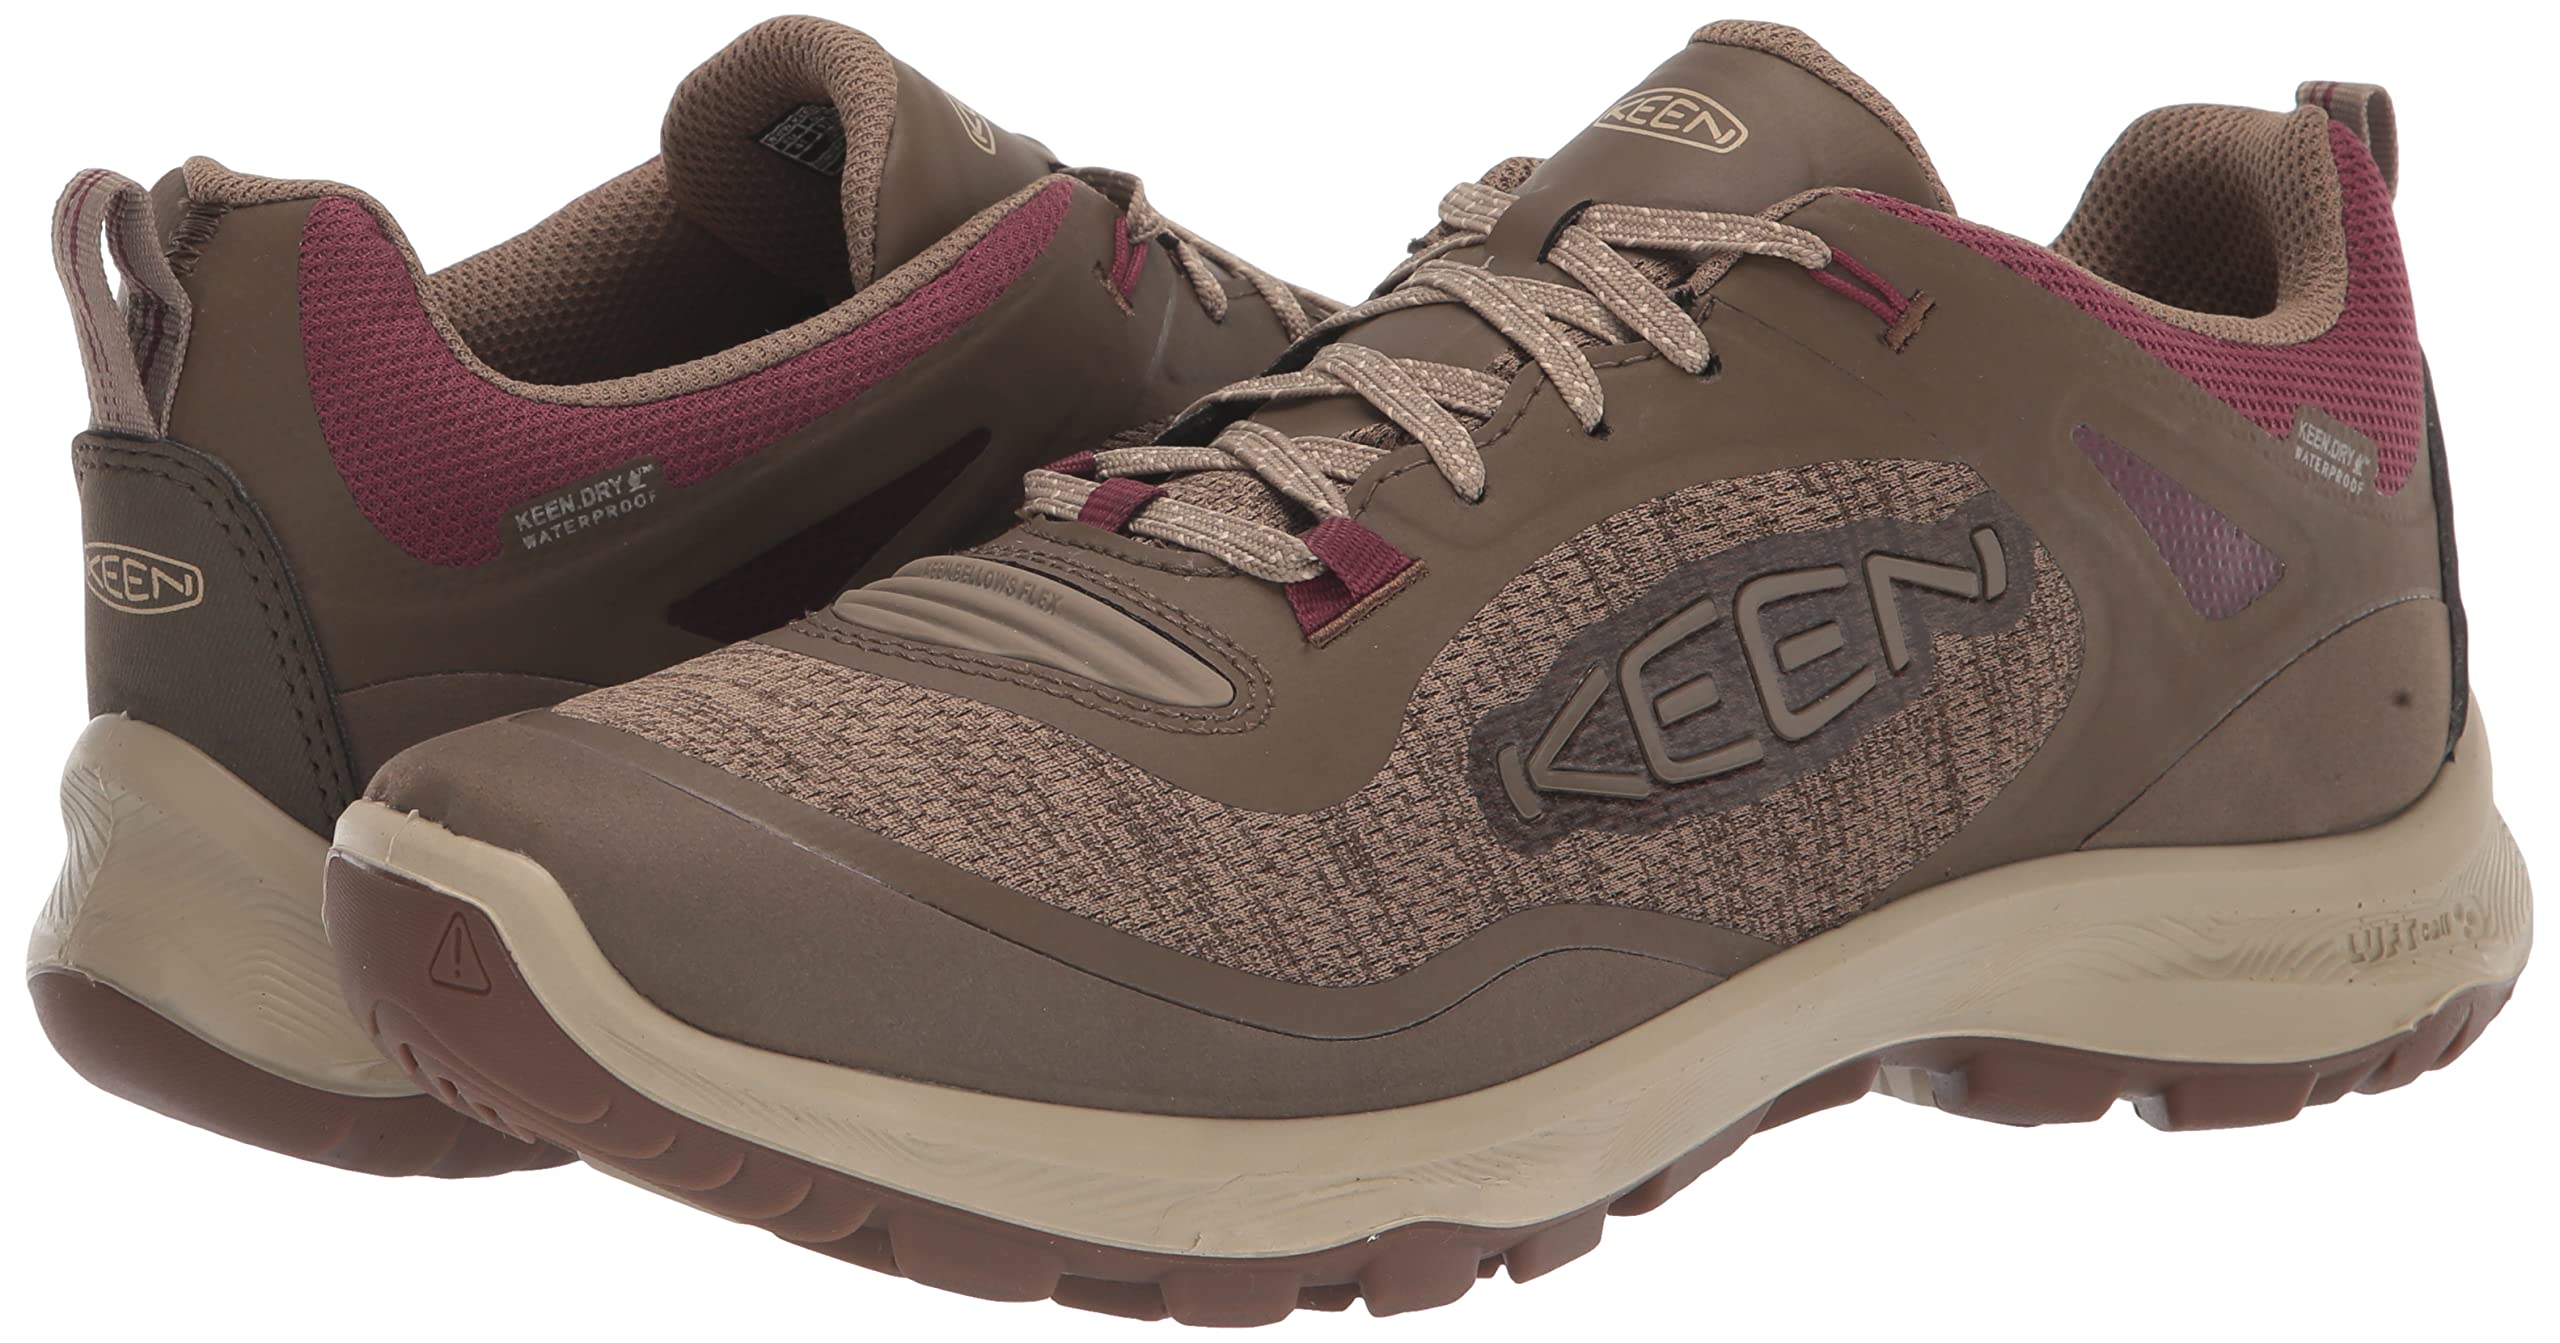 Keen Women's Terradora Flex Low Height Waterproof Hiking Shoes: Sizes 5, 6, 7.5, 9.5, 11 $28.89 or 7, 8, 8.5, 10 $33.99 + Free Shipping w/ Prime or on $35+